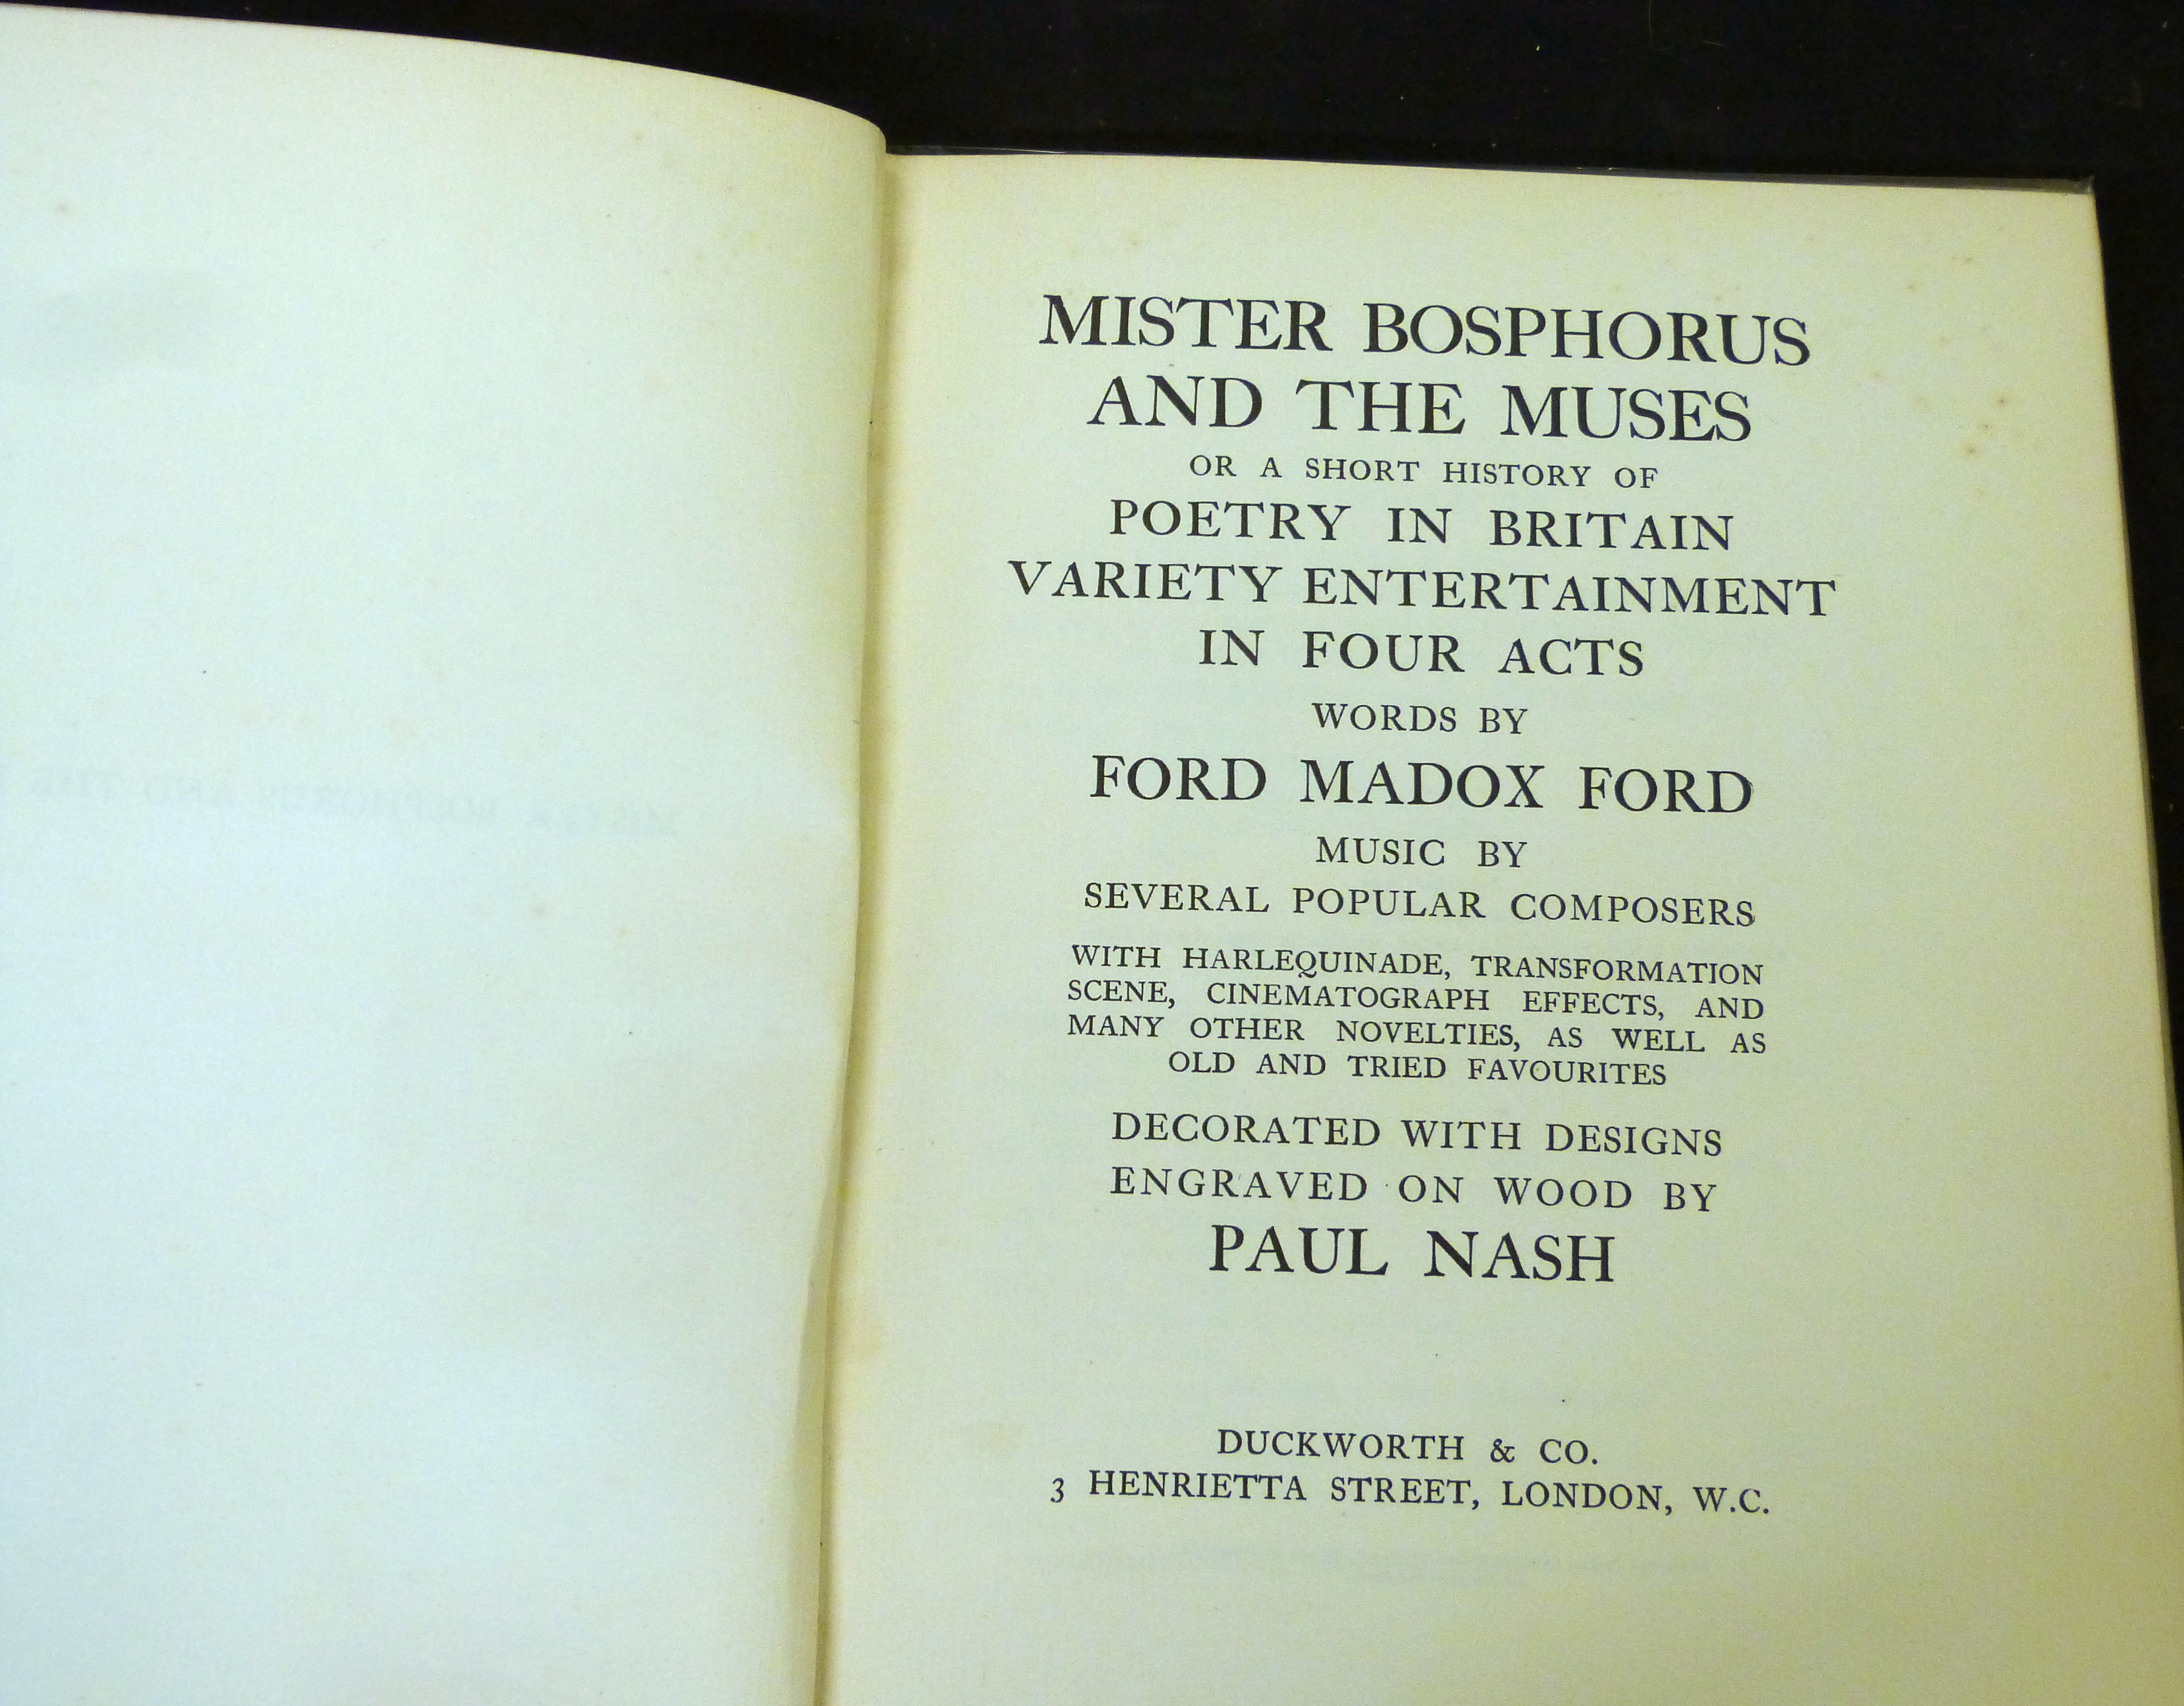 FORD MADOX FORD: MISTER BOSPHORUS AND THE MUSES..., ill Paul Nash, London, Duckworth, 1923, 1st - Image 2 of 2